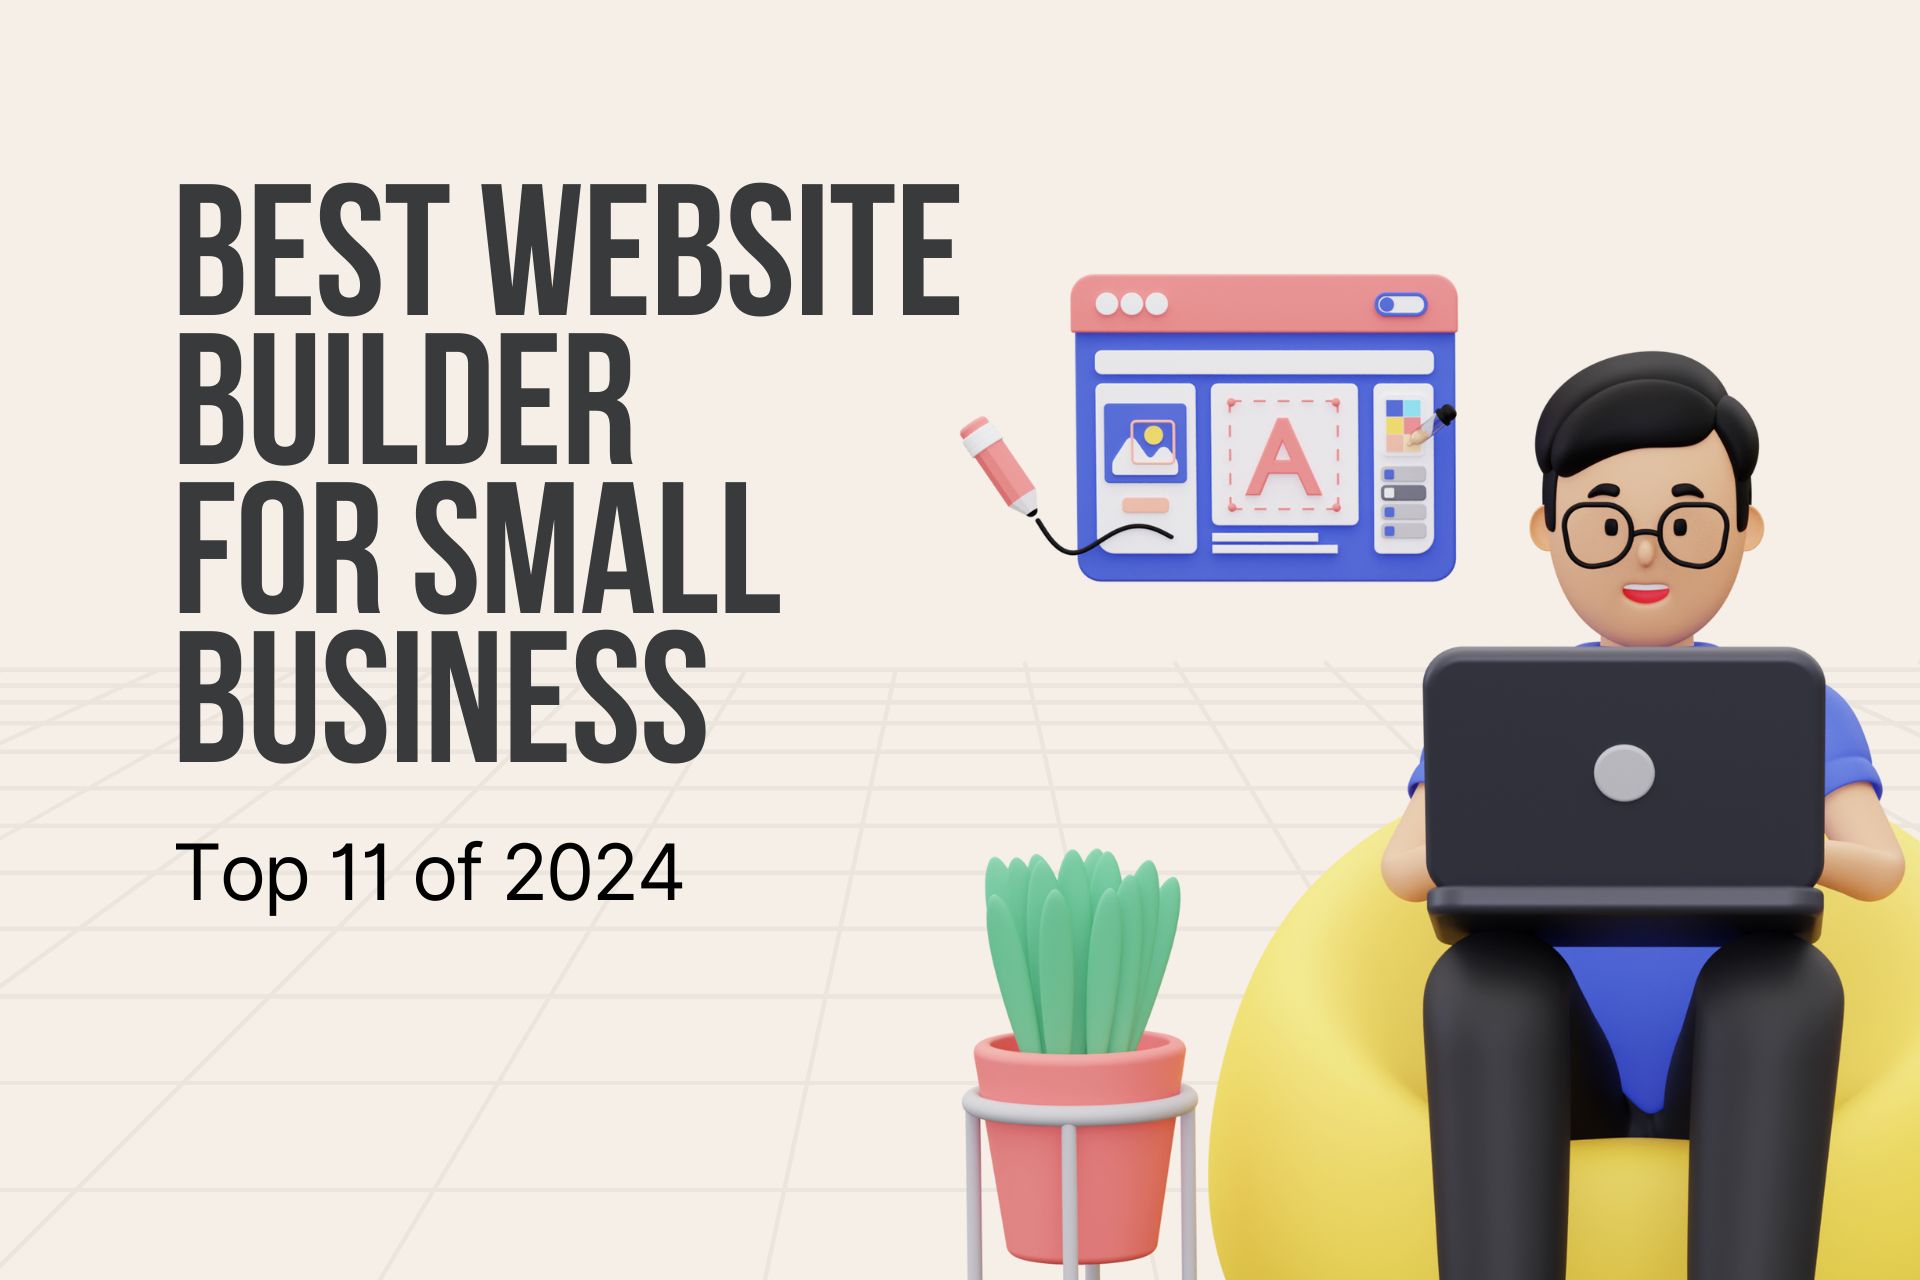 Cover image with the text "Best Website Builder for Small Business: Top 11 of 2024" and a 3D illustration of a man at the computer on the right.